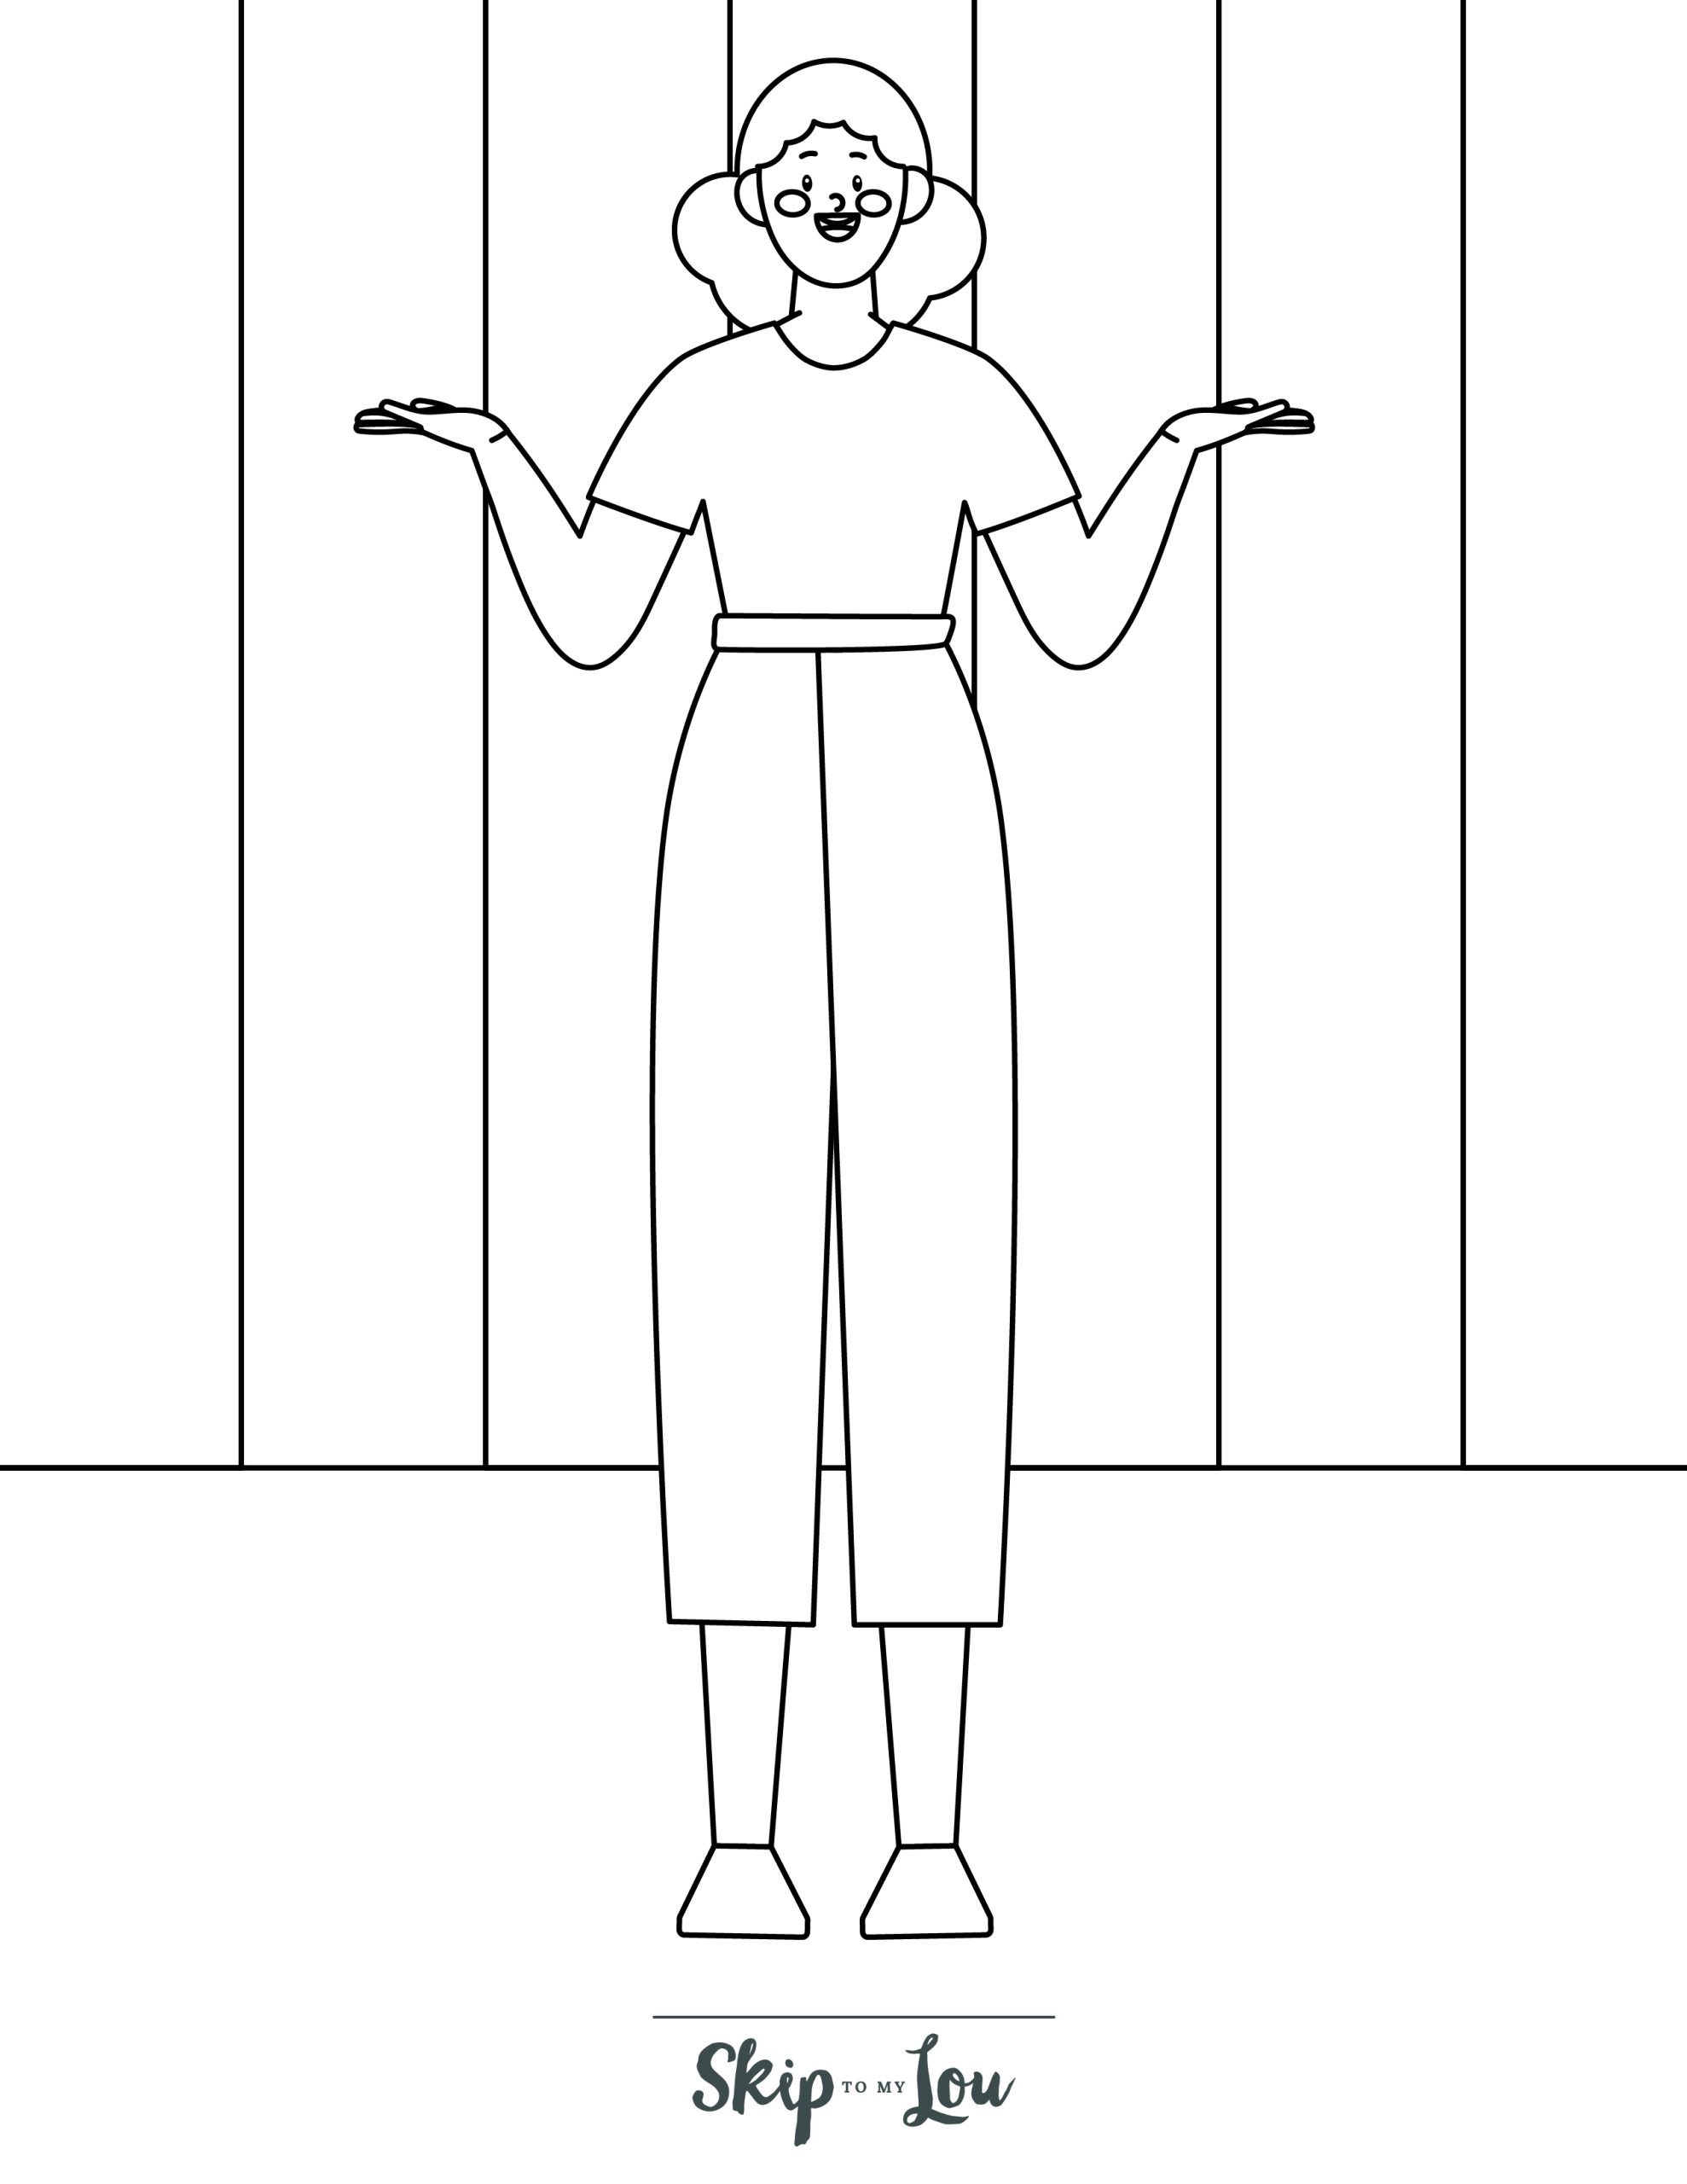 People Coloring Page 6 - Line drawing of cute girl standing